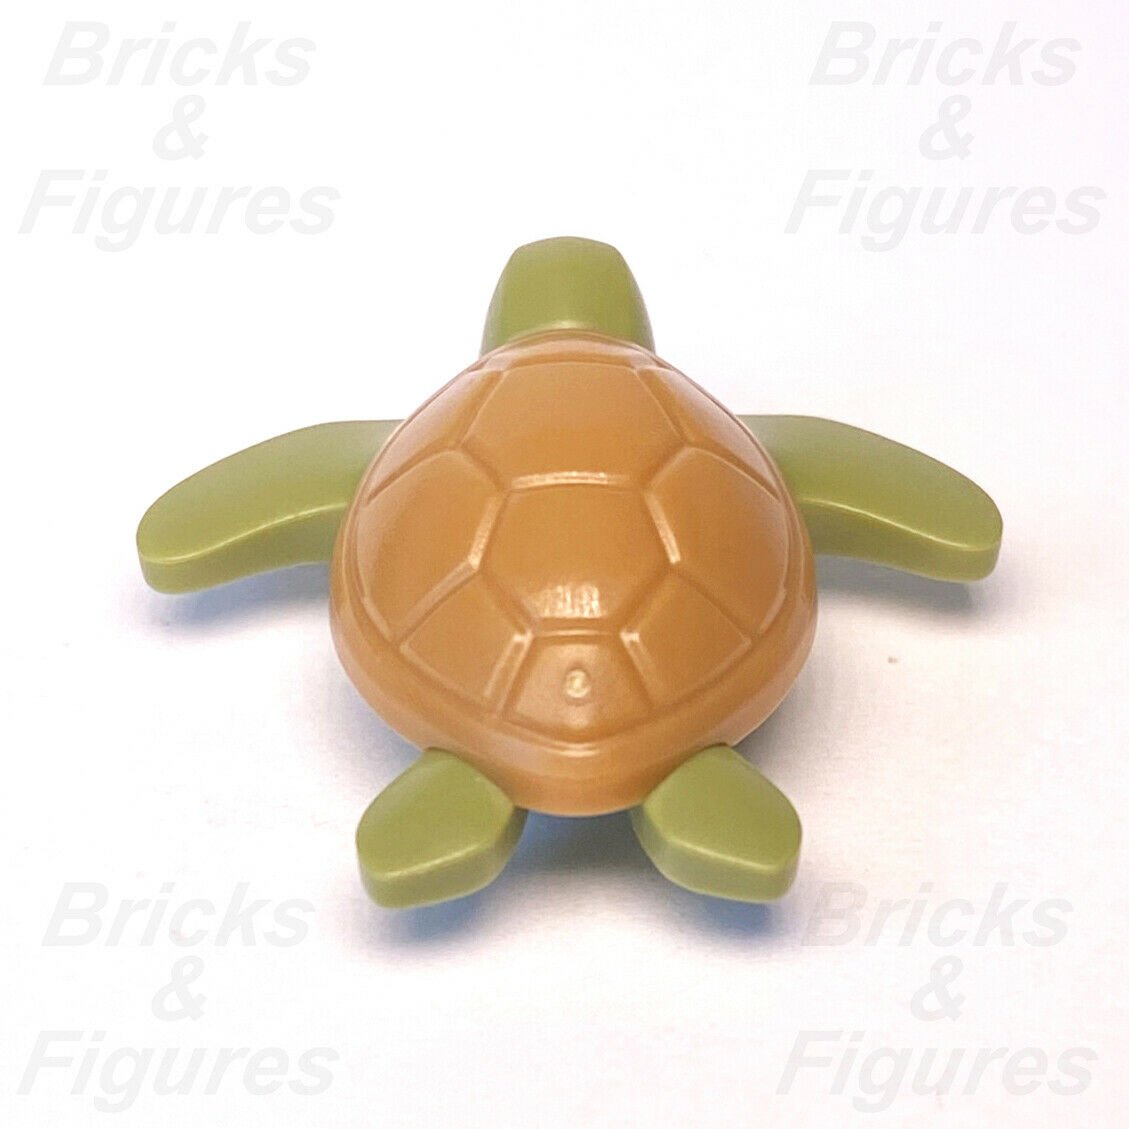 New Collectible Minifigures LEGO Sea Turtle From Series 20 Animal Part 71027 - Bricks & Figures